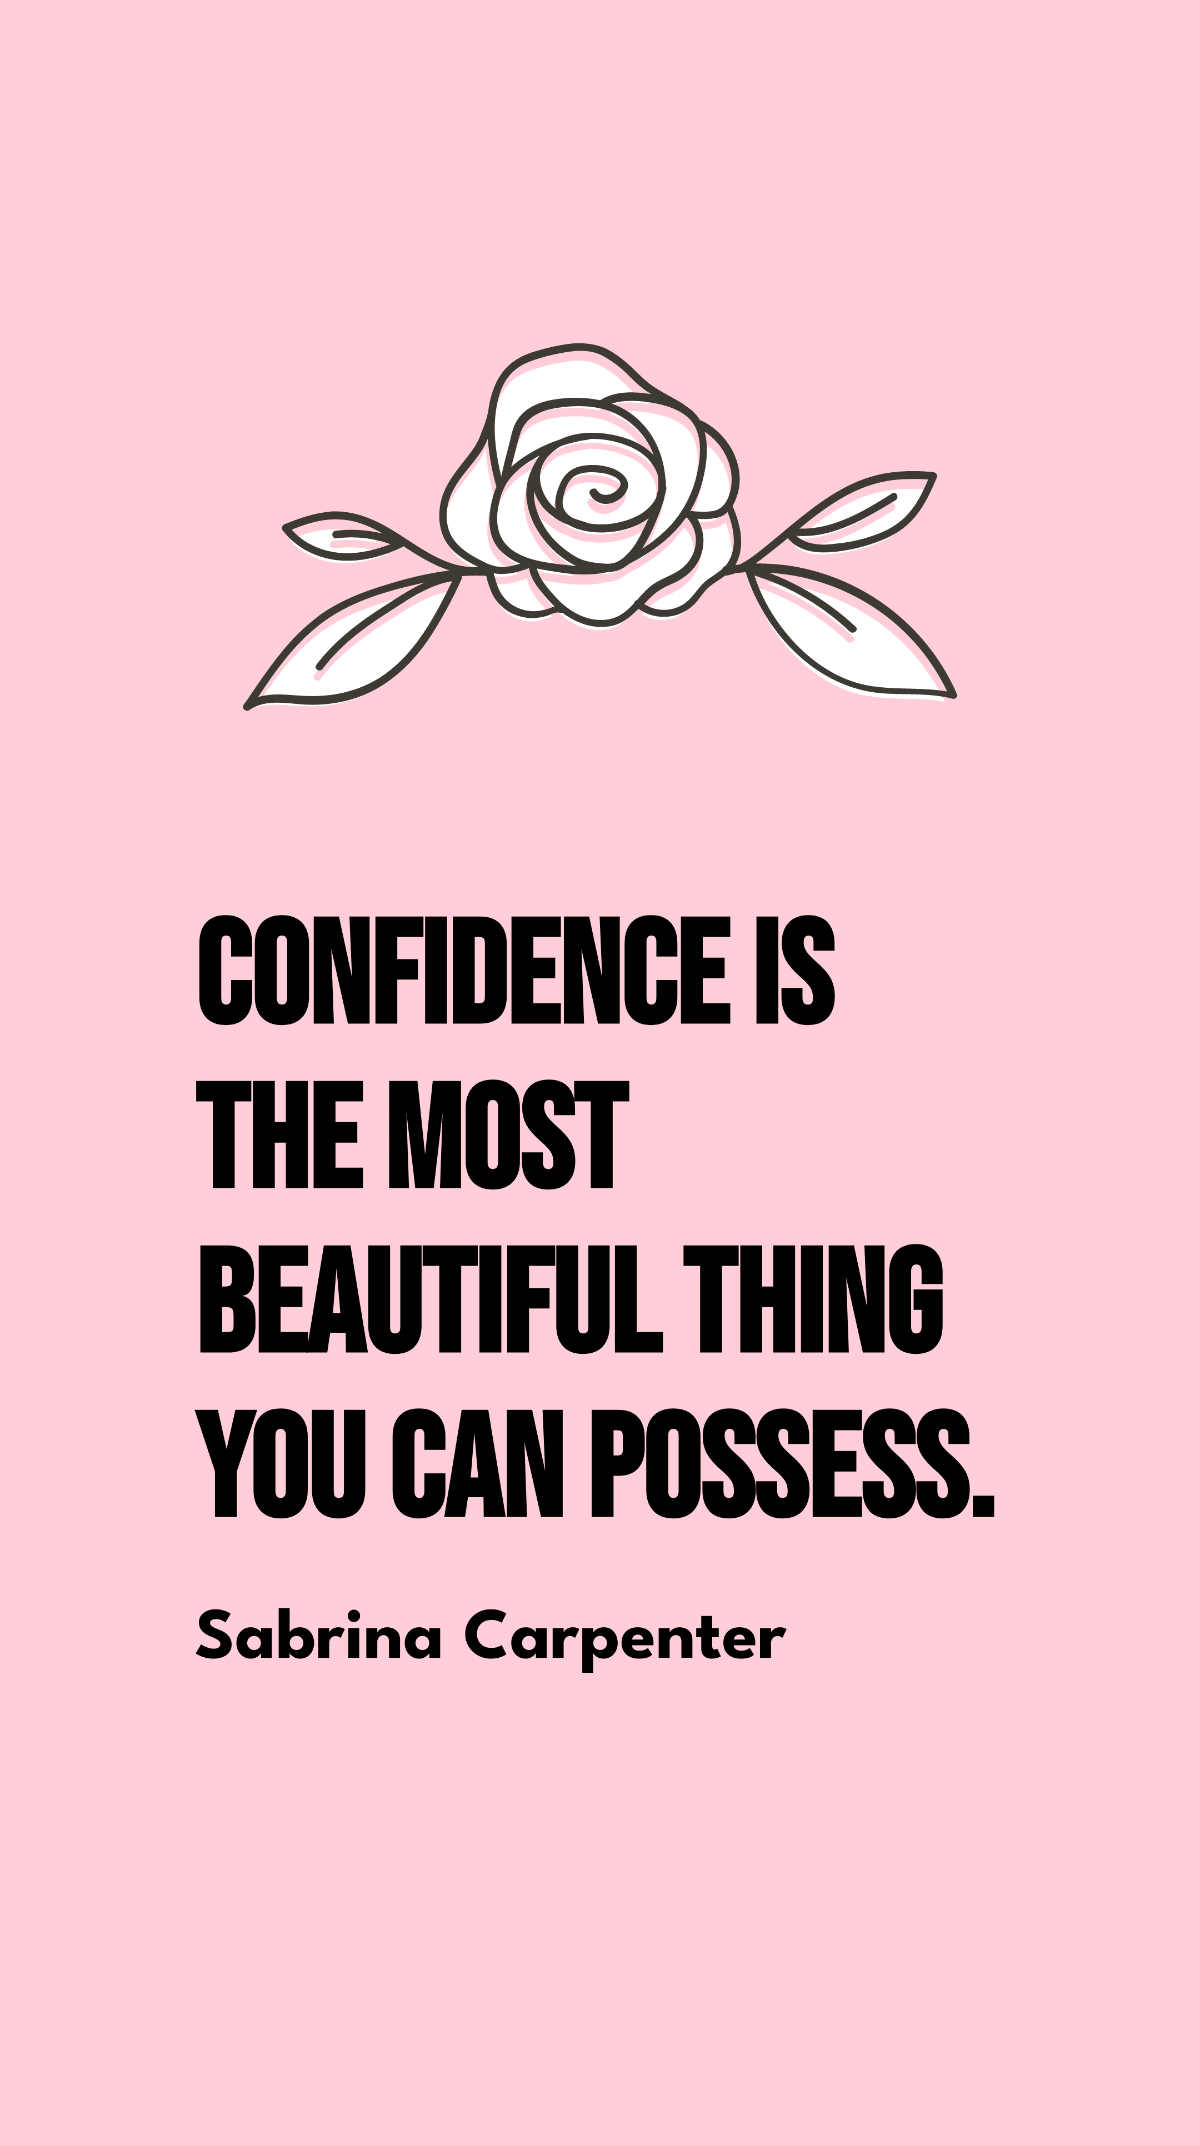 Free Sabrina Carpenter - Confidence is the most beautiful thing you can possess. Template